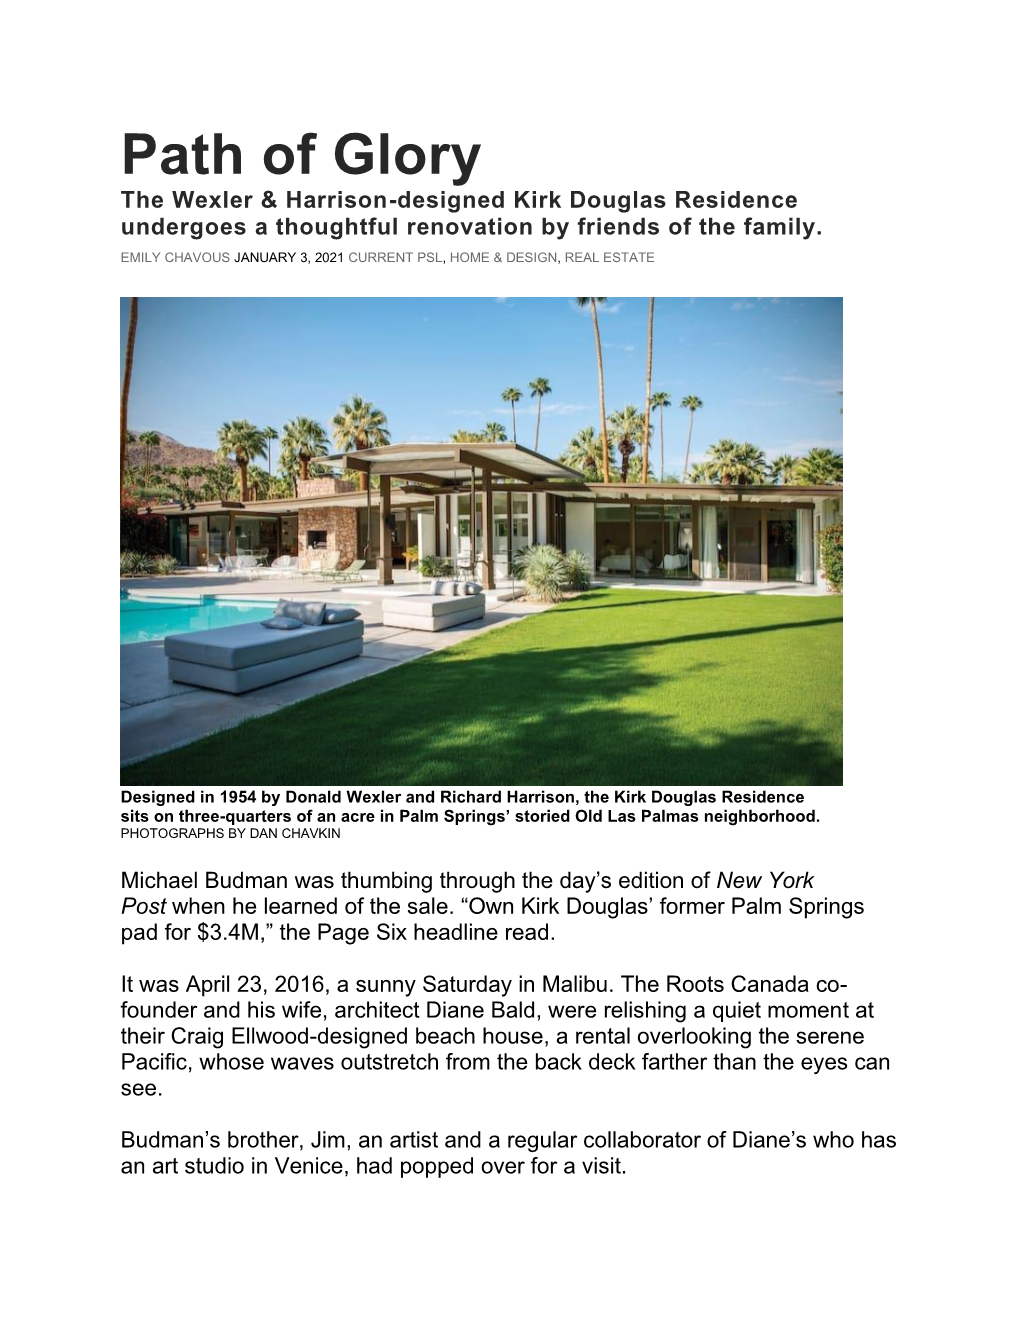 Path of Glory the Wexler & Harrison-Designed Kirk Douglas Residence Undergoes a Thoughtful Renovation by Friends of the Family